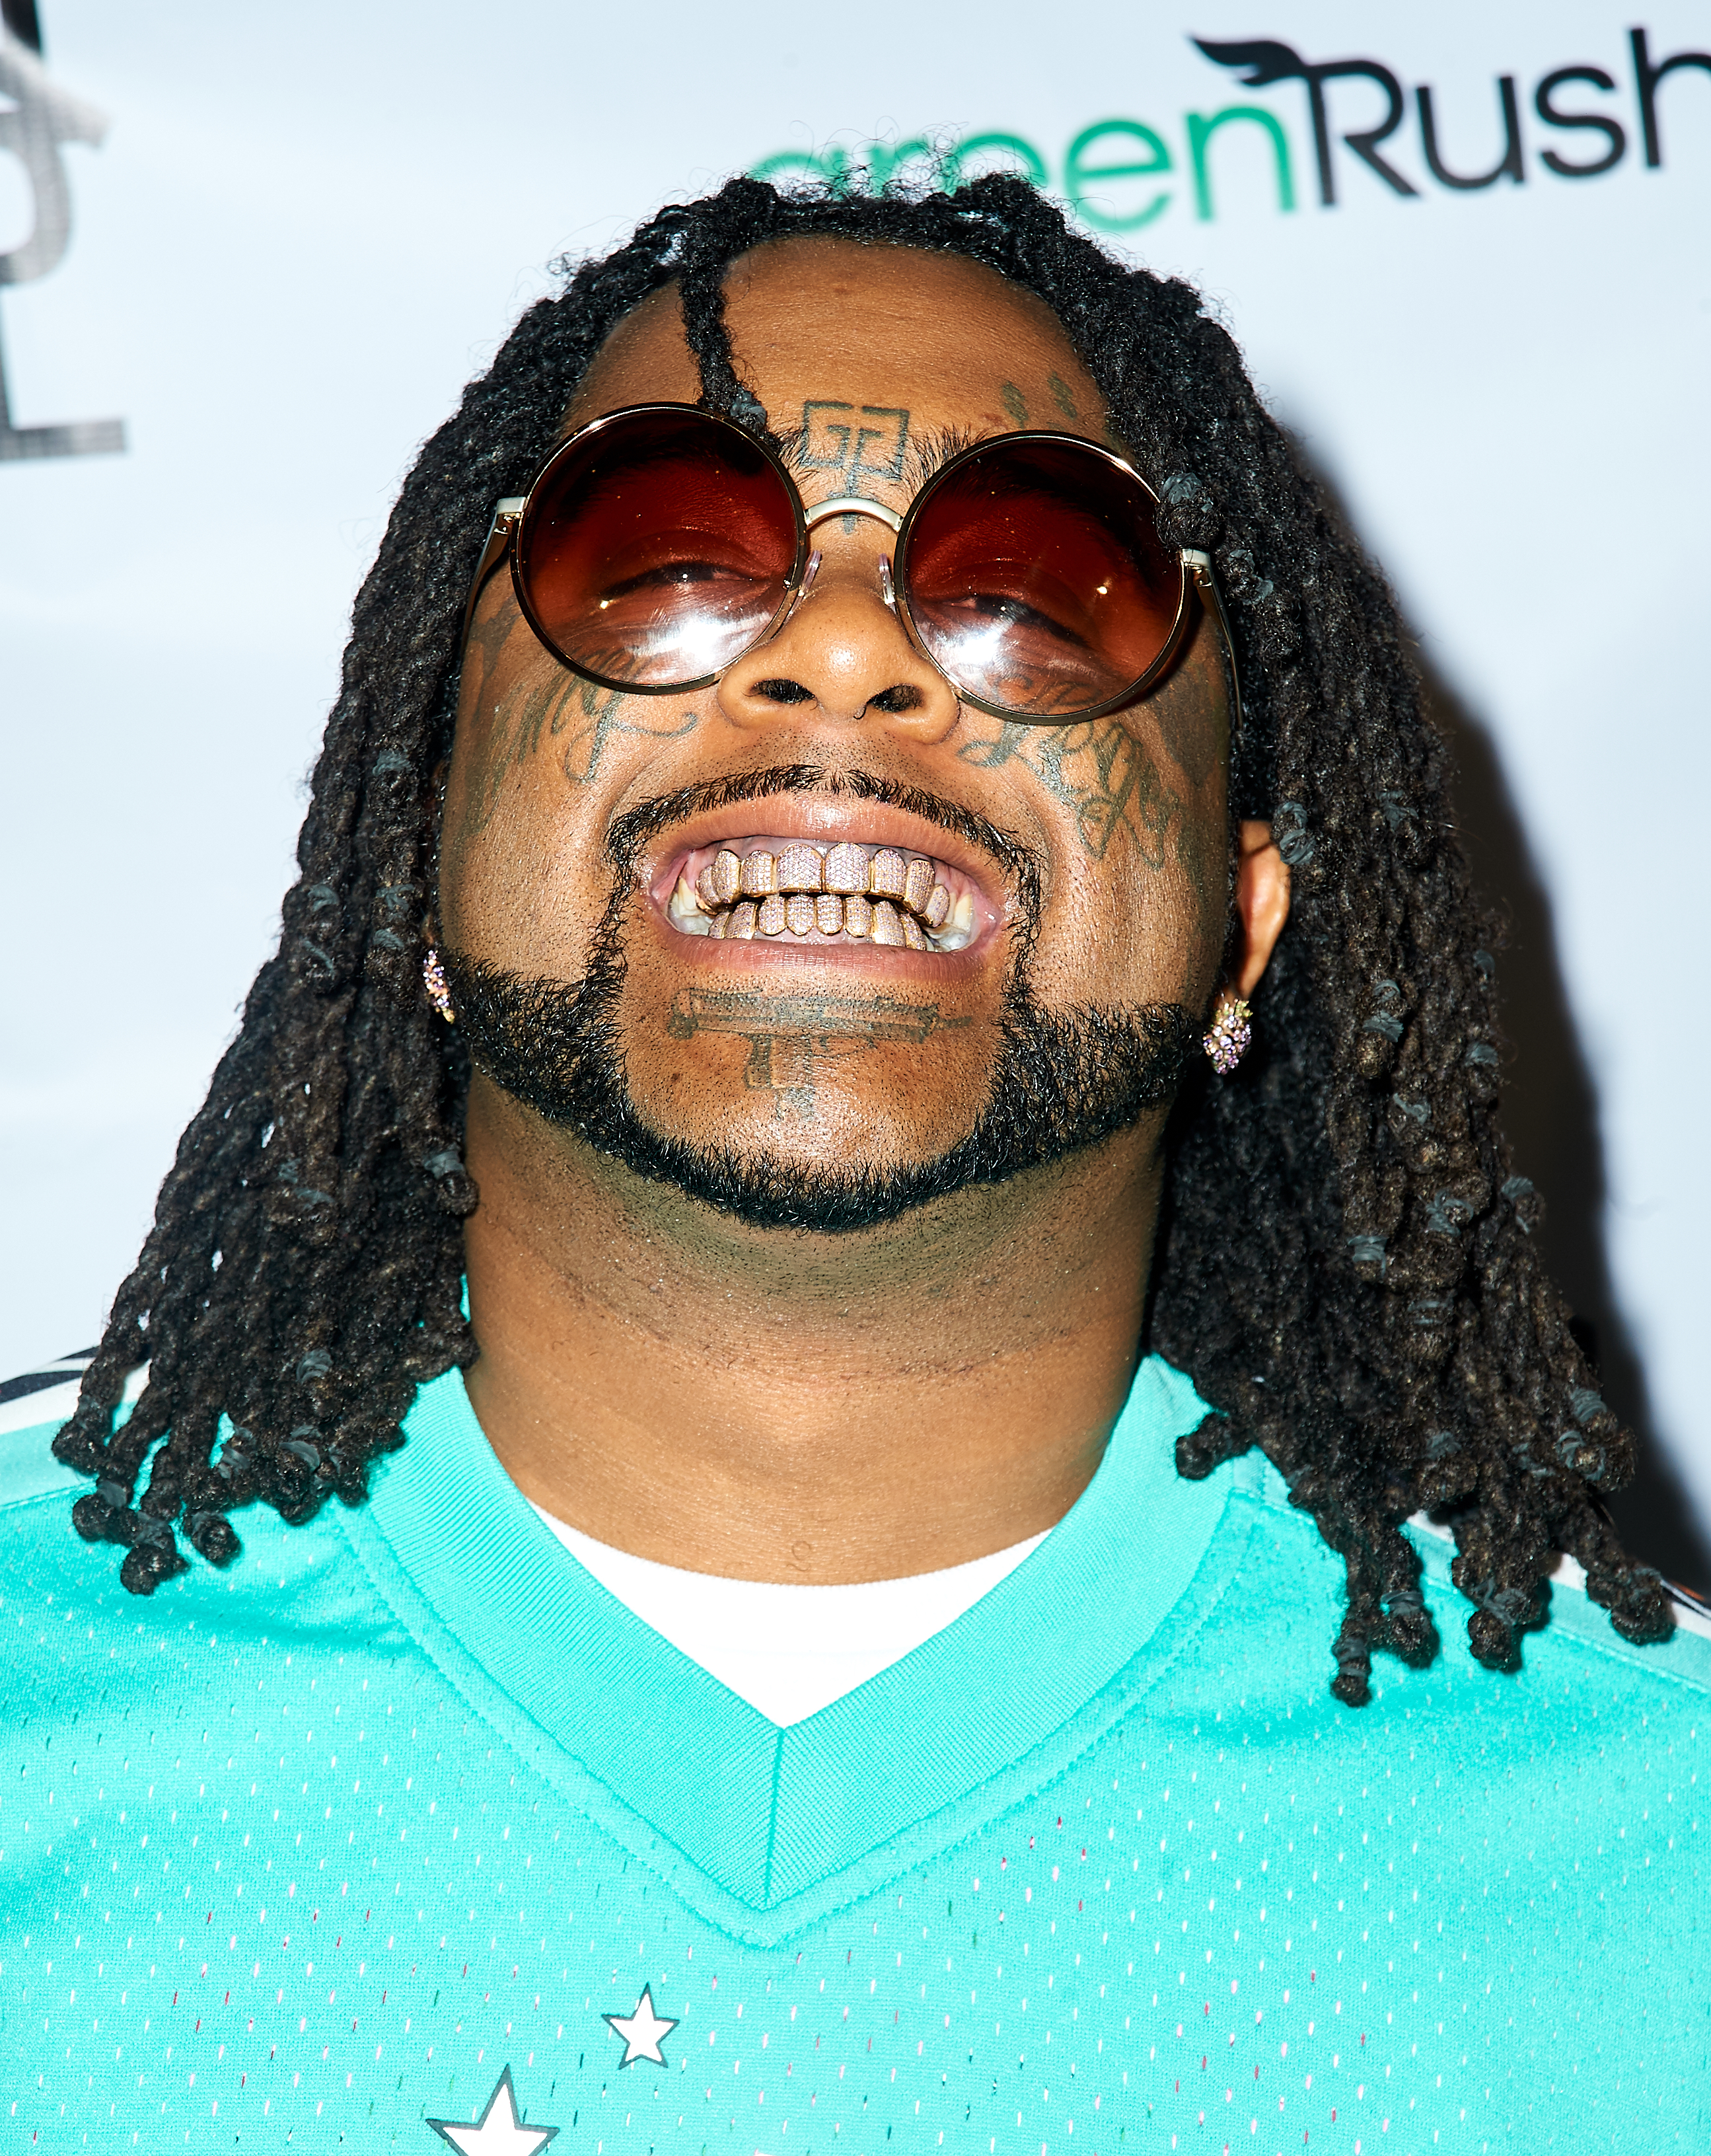 03 greedo sentenced to 20 years in prison